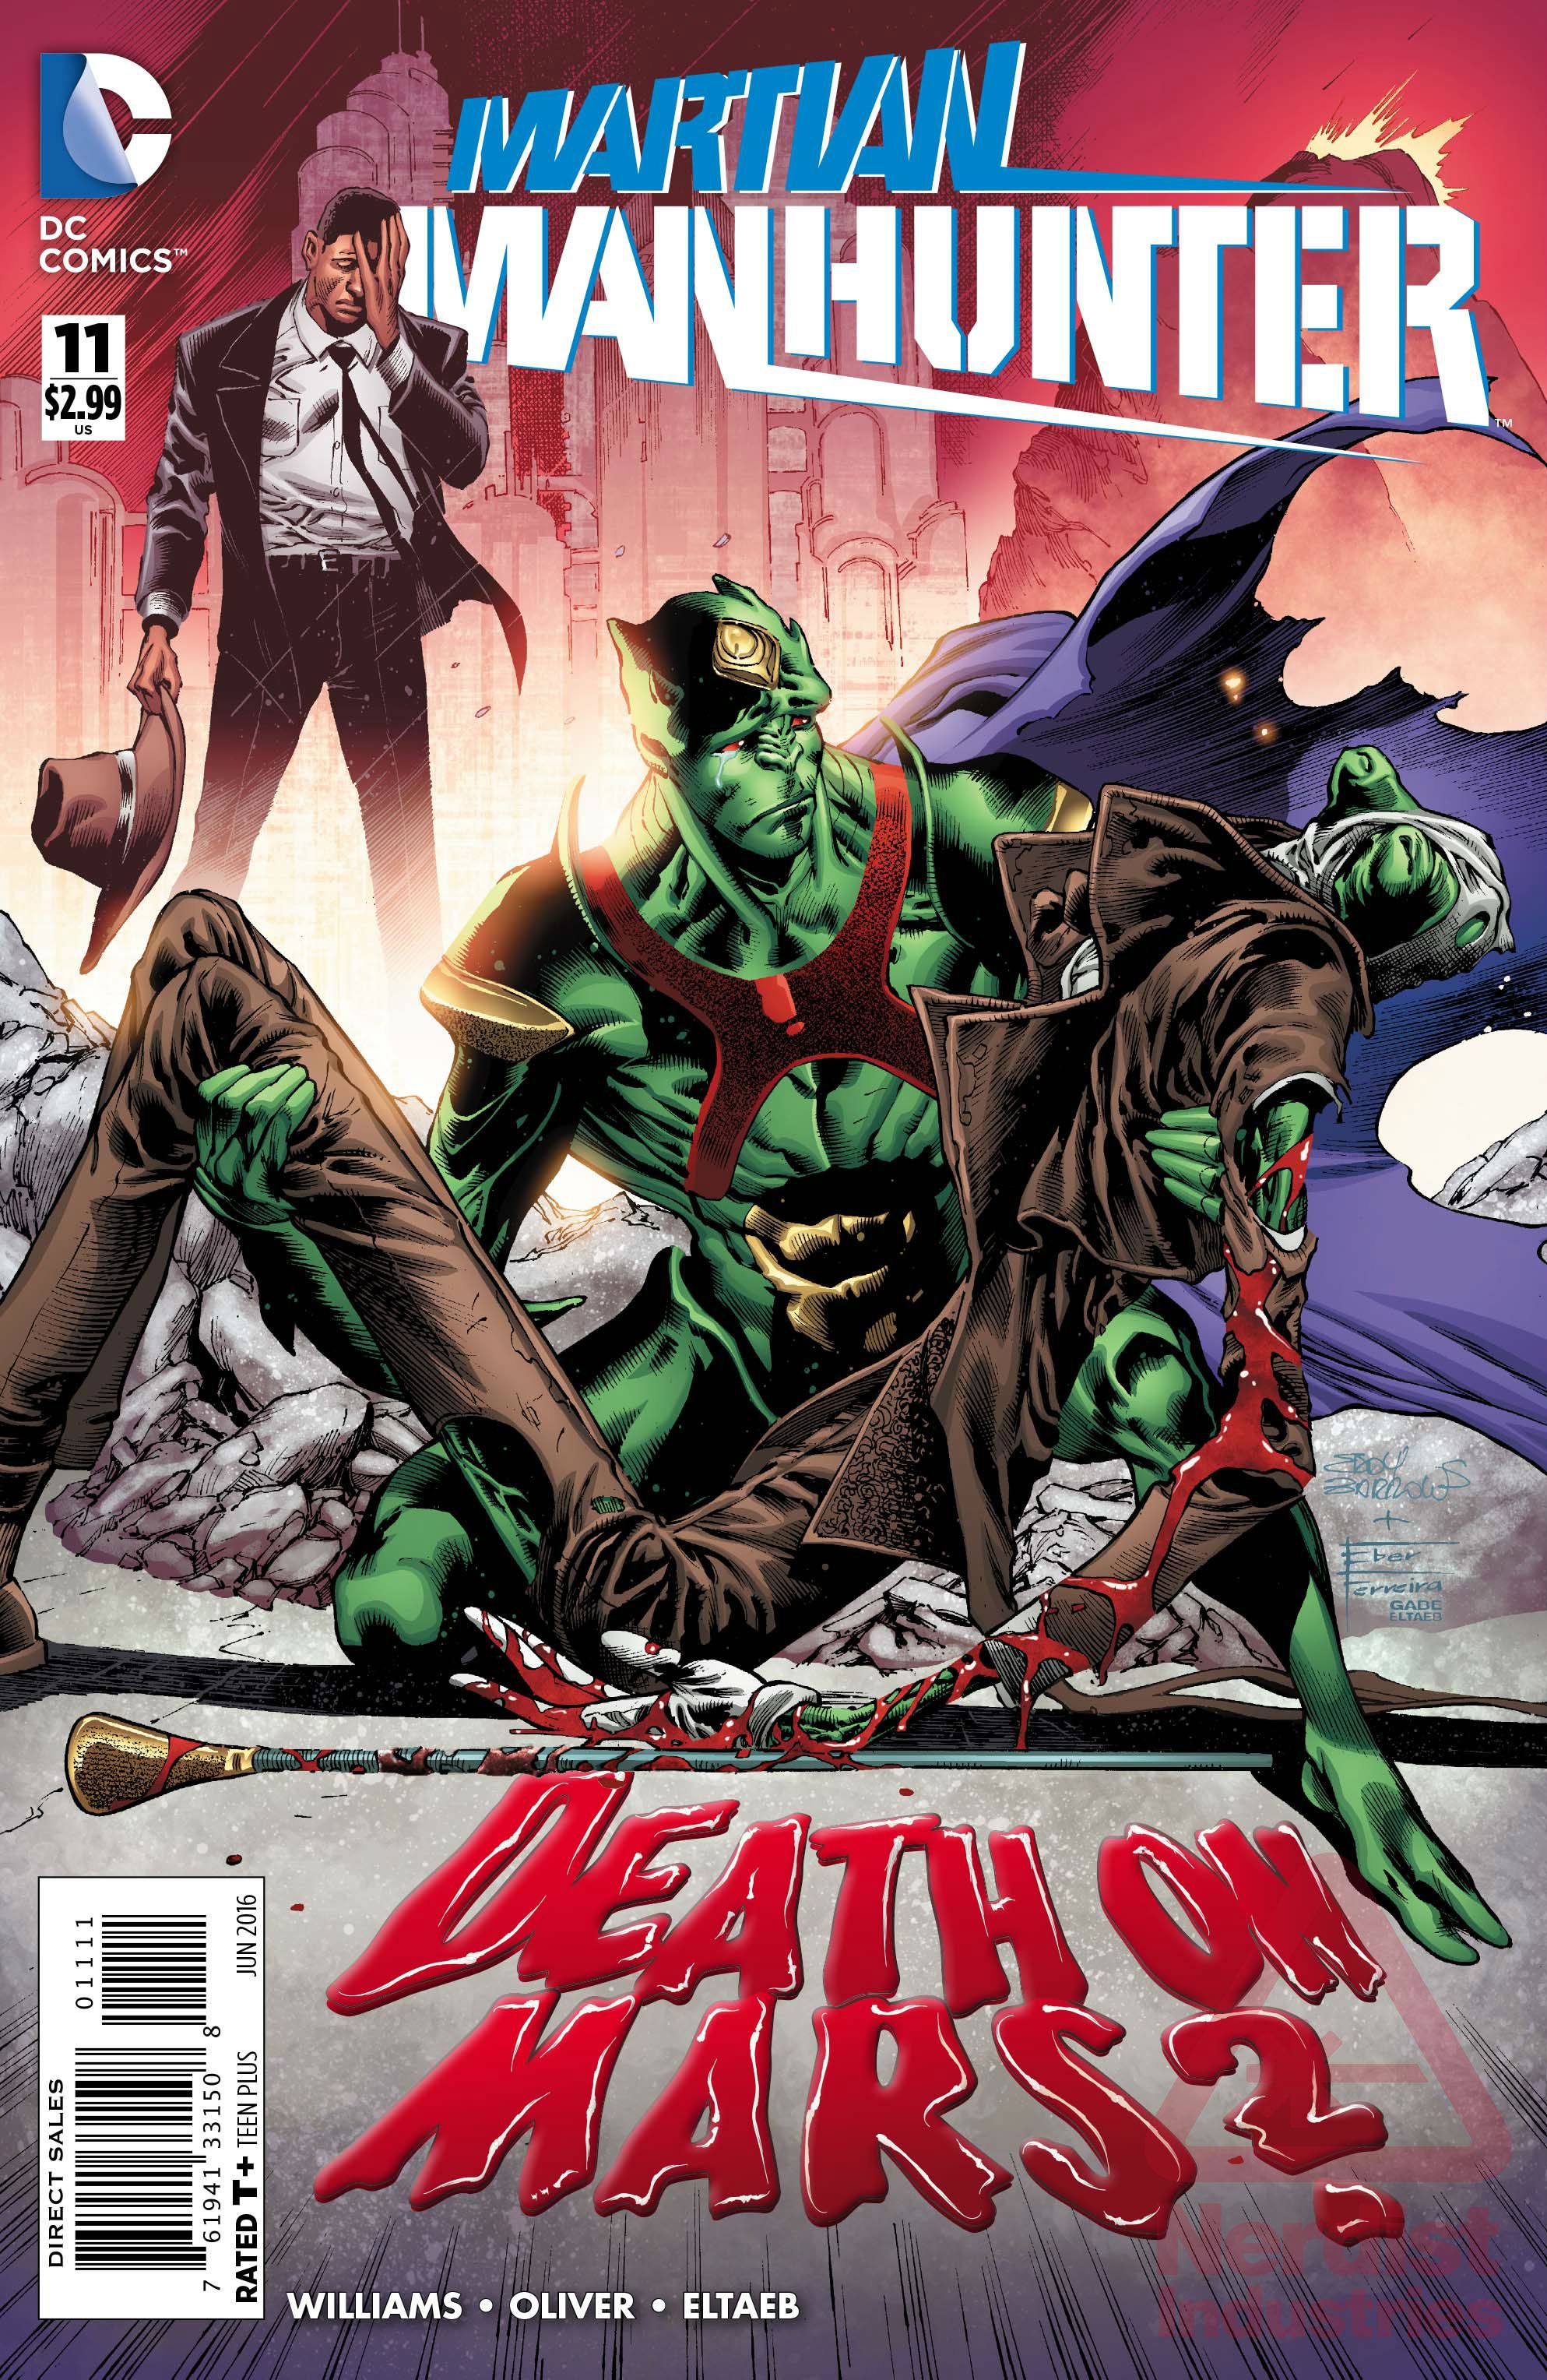 Two Worlds Hang in the Balance in MARTIAN MANHUNTER Preview (Exclusive)